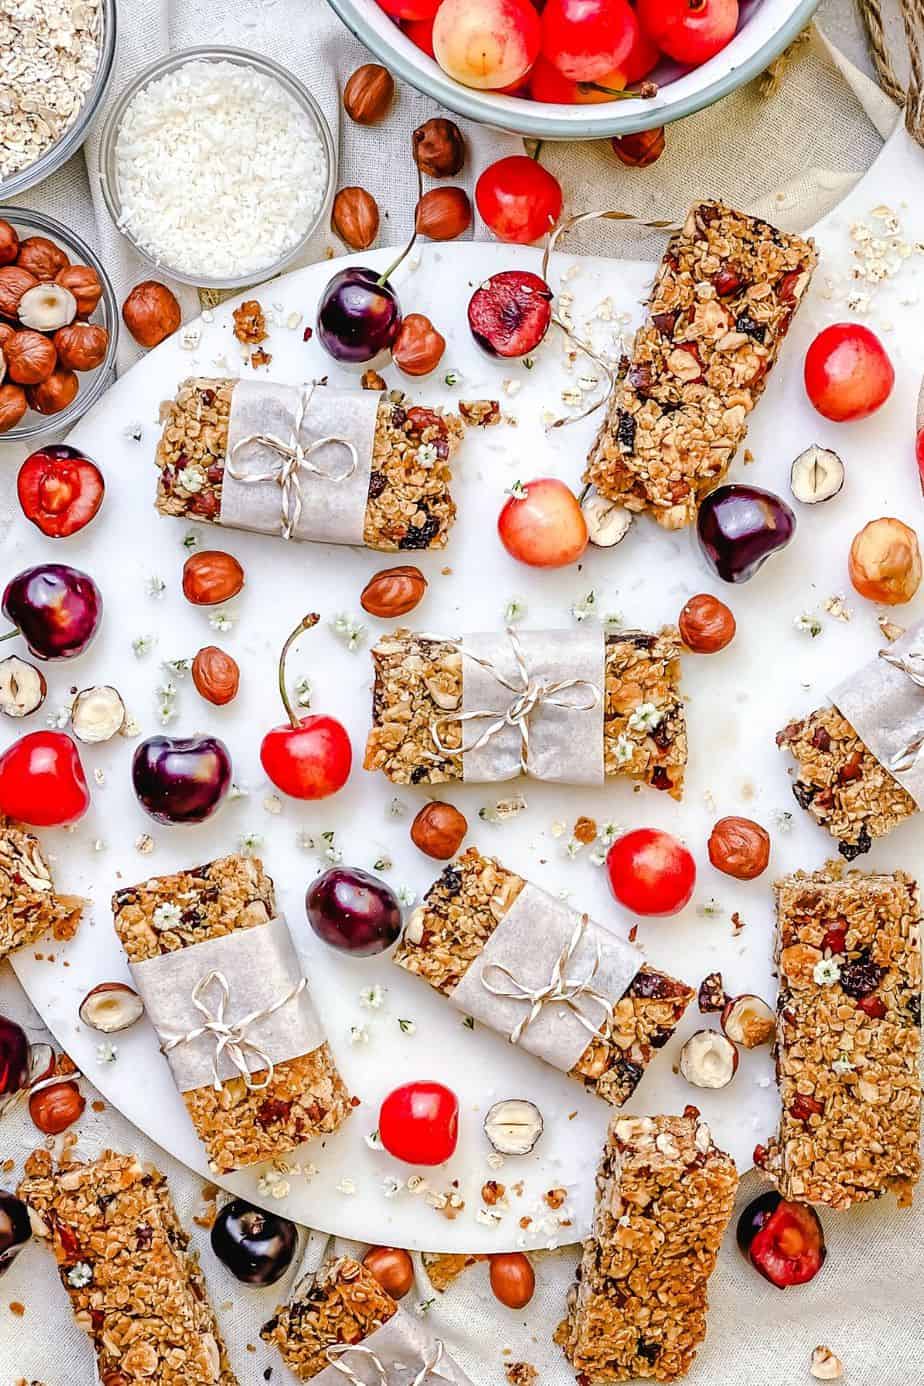 This Hazelnut Cherry Granola Bars recipe is made with wholesome, simple, healthy ingredients that are sure to be sitting in your kitchen pantry shelf and waiting for you to make these delicious snacks. These granola bars are dairy free, gluten free, so tasty and fun to make. - The Yummy Bowl